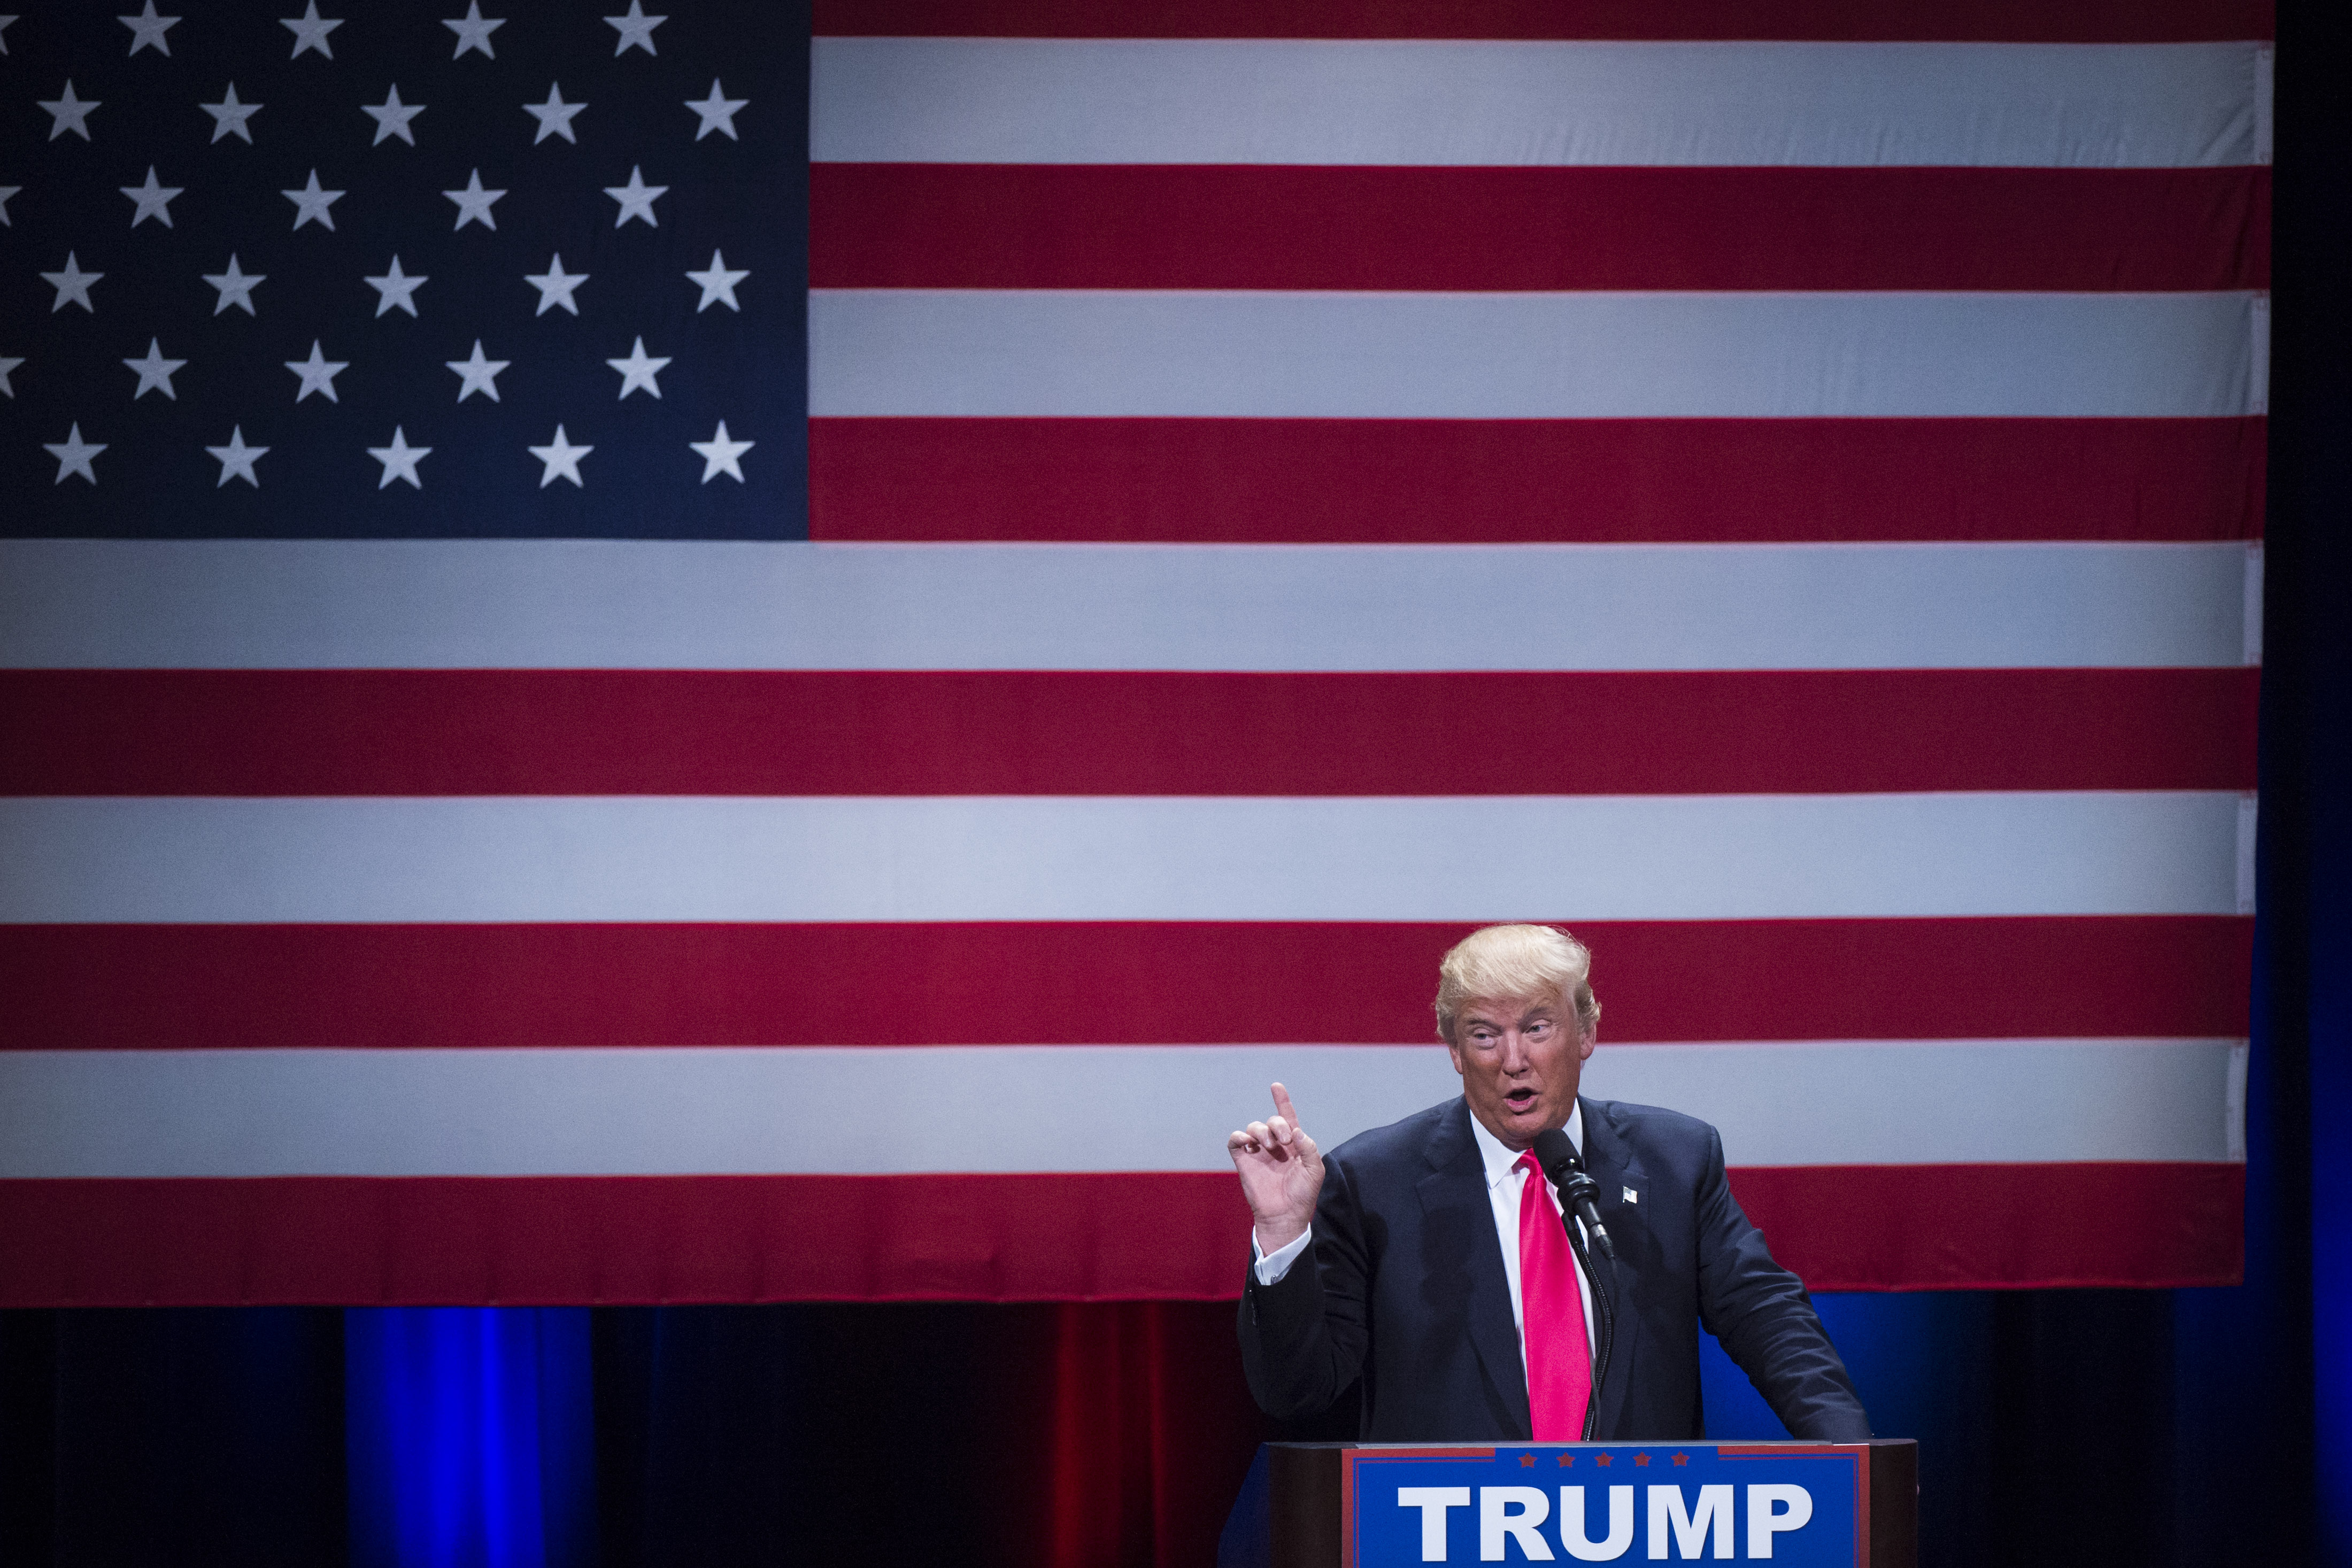 Republican presidential candidate Donald Trump speaks during a campaign event at the Milwaukee Theatre in Milwaukee, Wisc., on April 04, 2016.